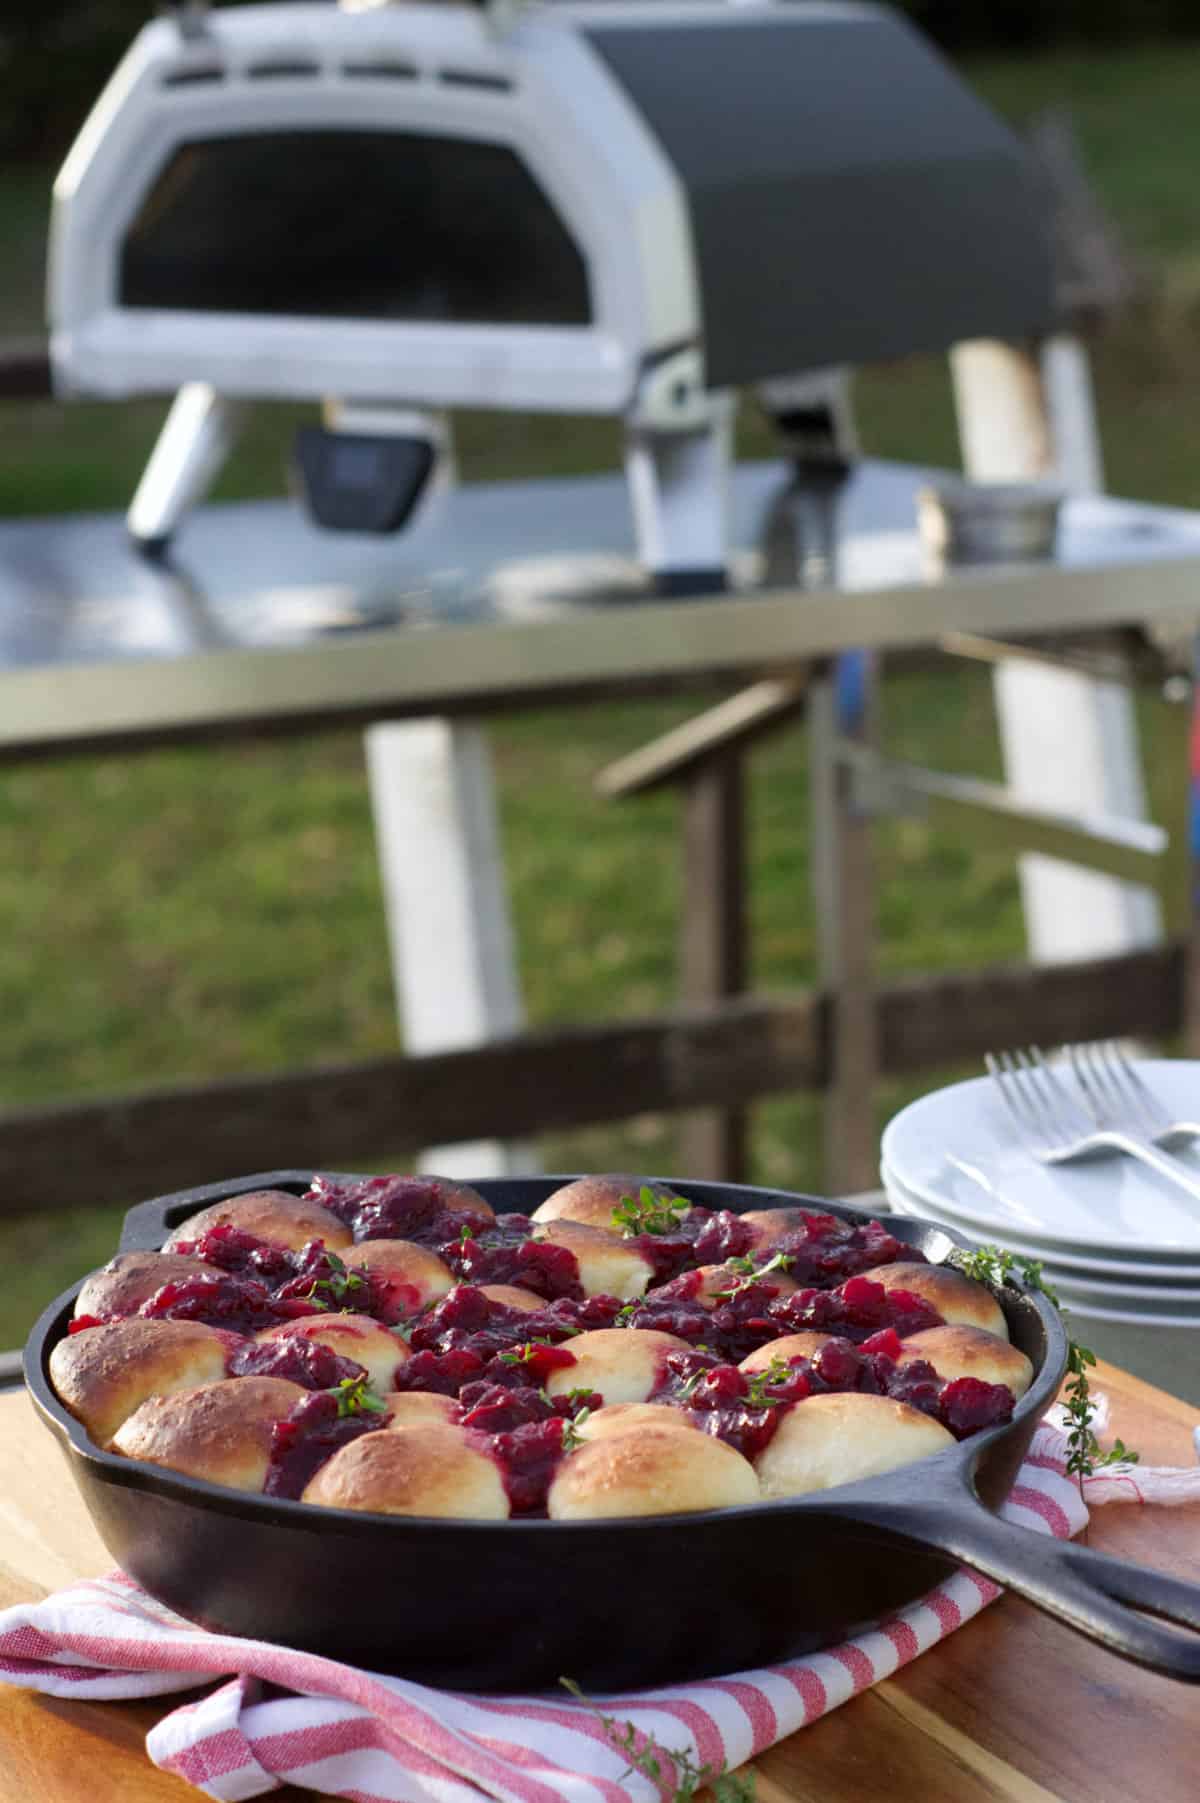 Cranberry brie pull apart bread in a cast iron skillet, displayed with an Ooni pizza oven in the background.